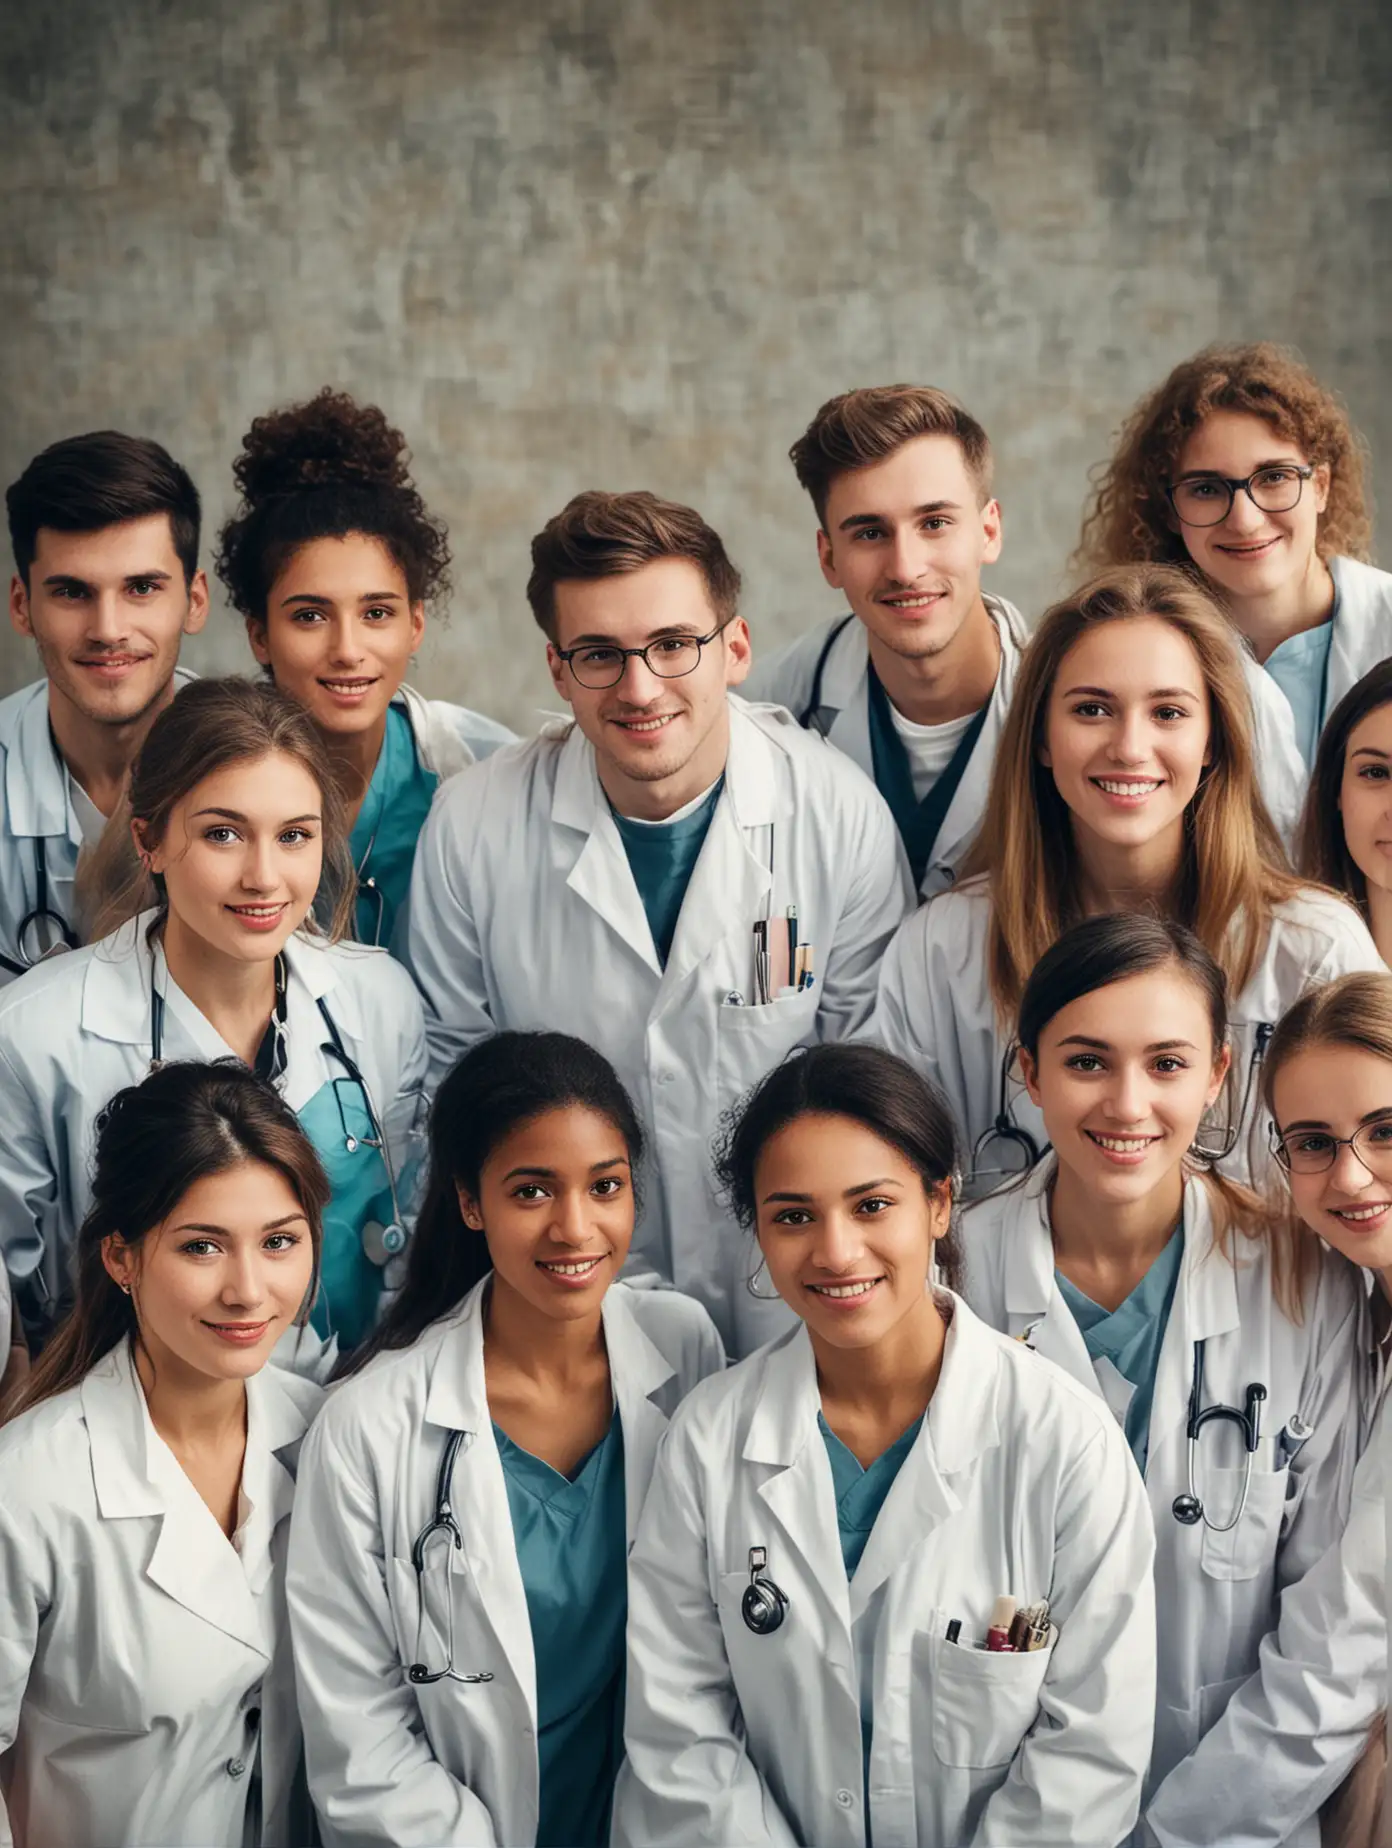 Diverse Medical Students Engaged in Study